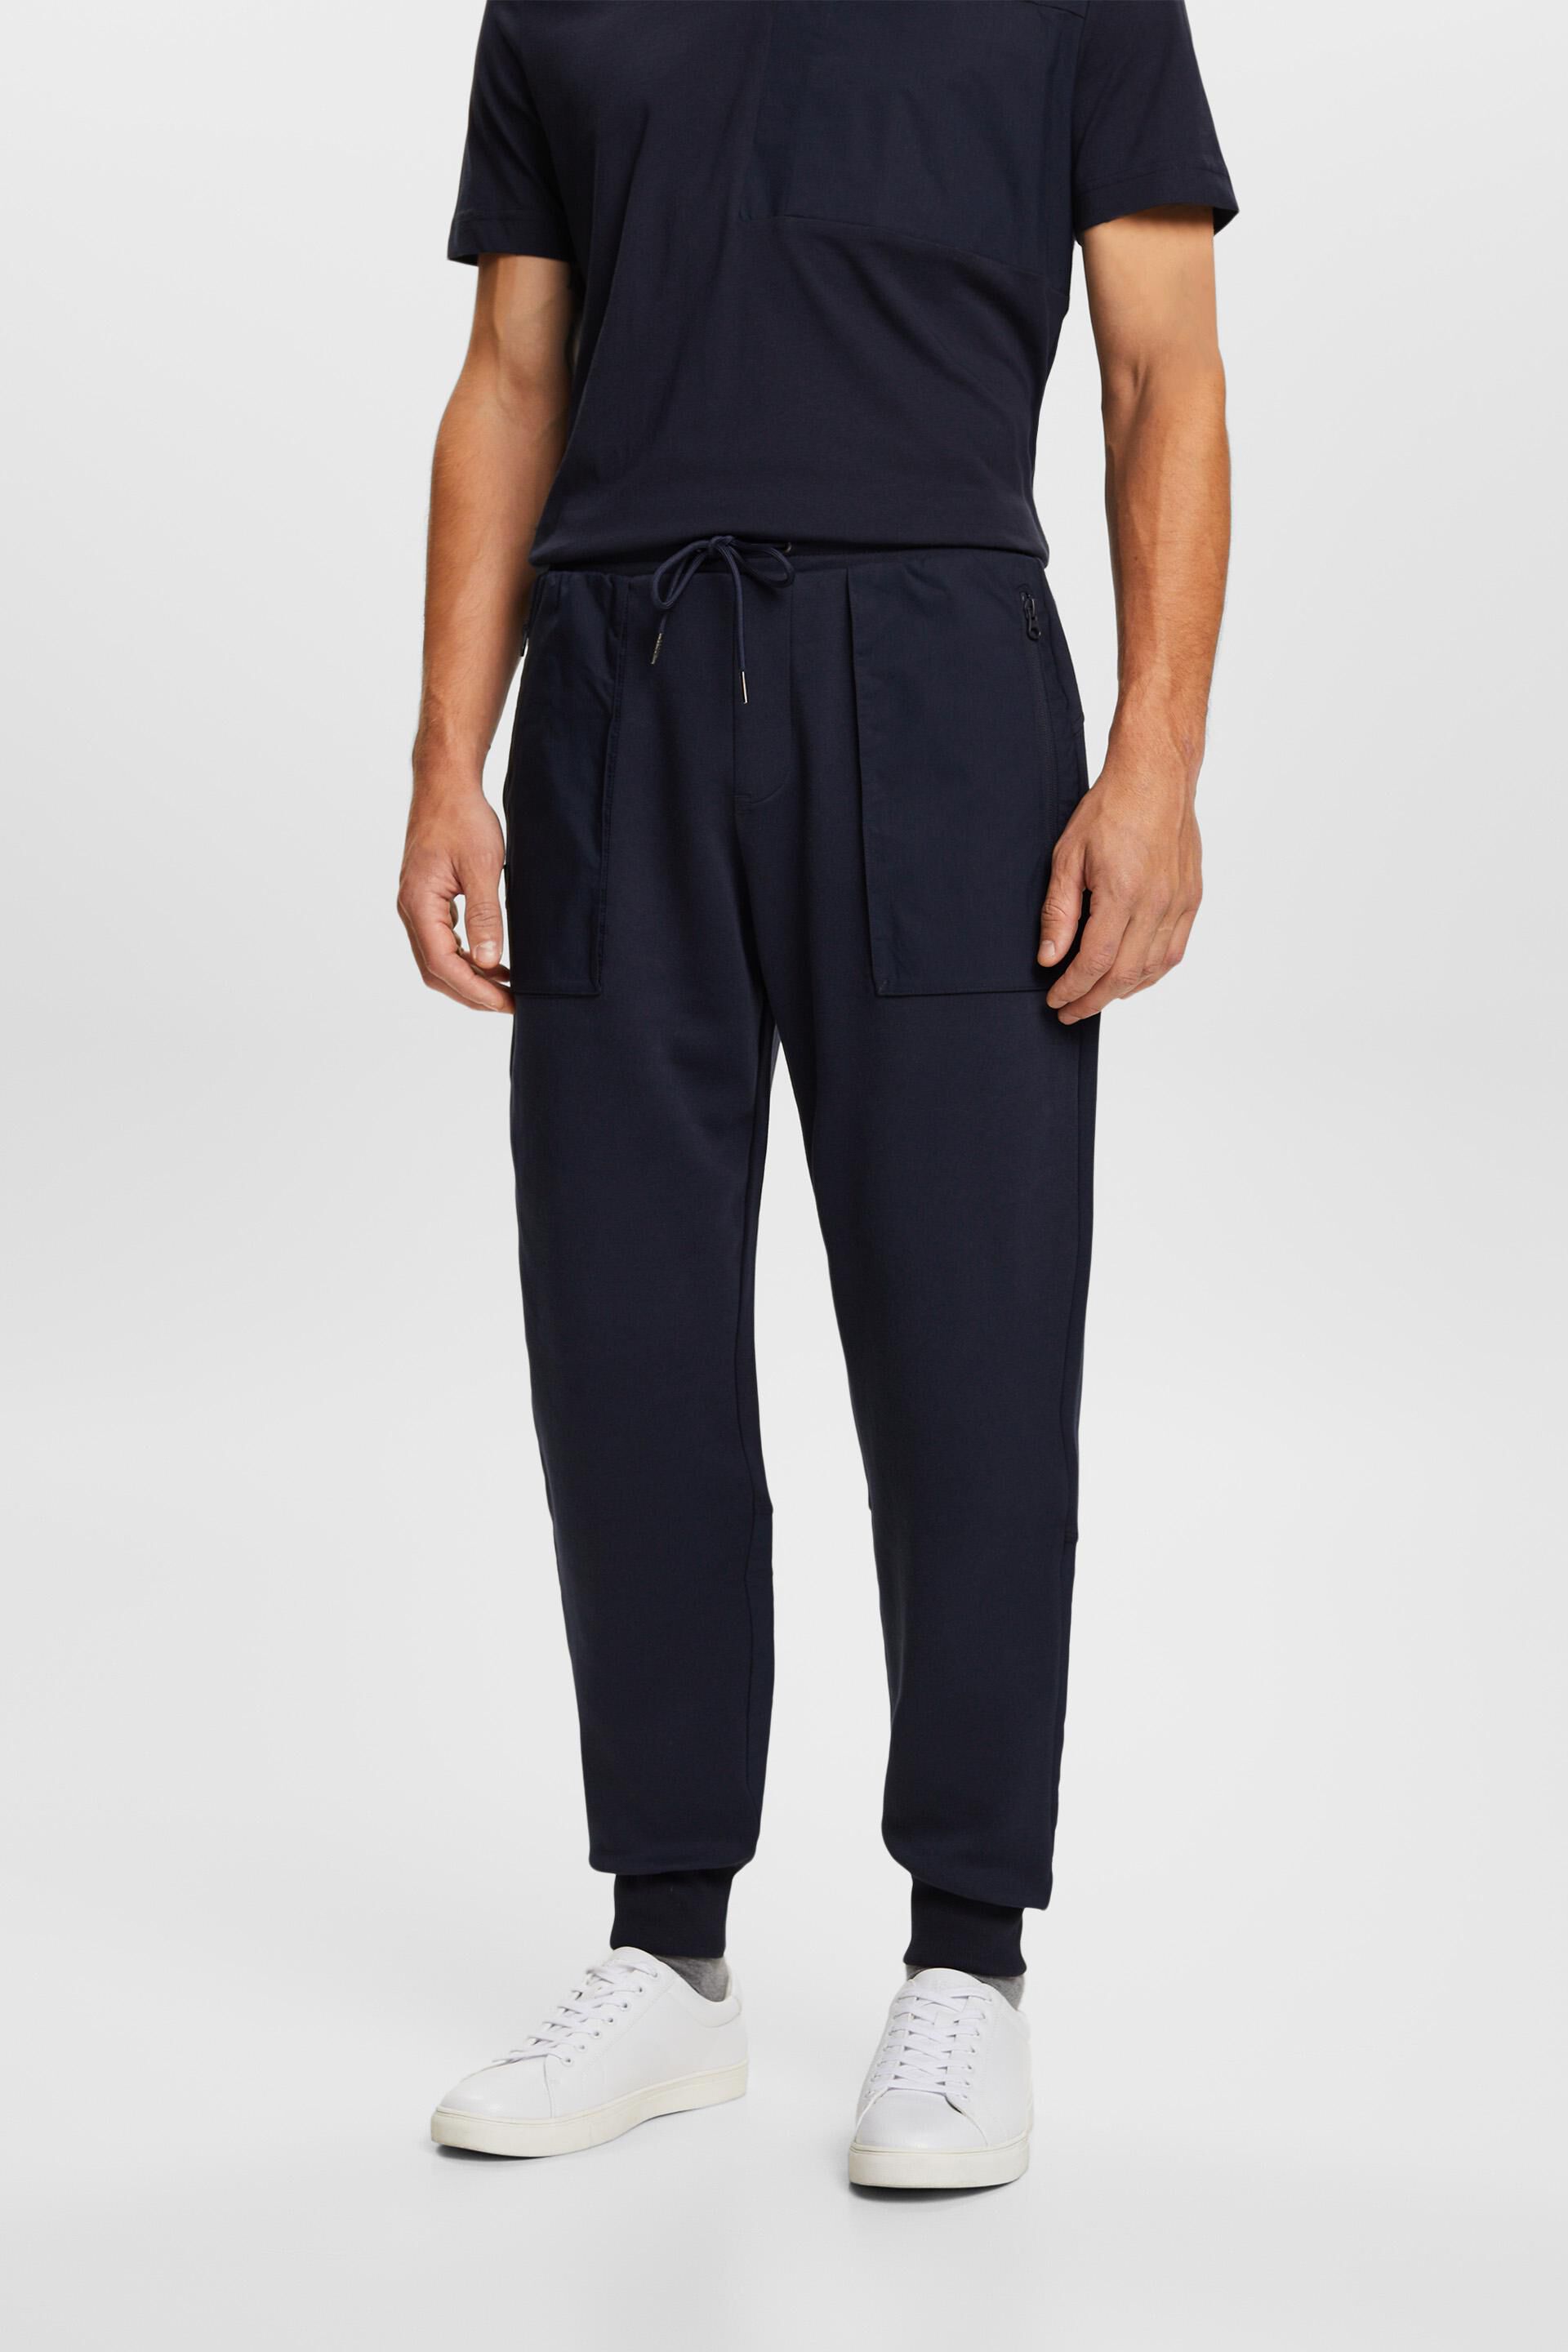 Esprit Fashion material in mixed joggers